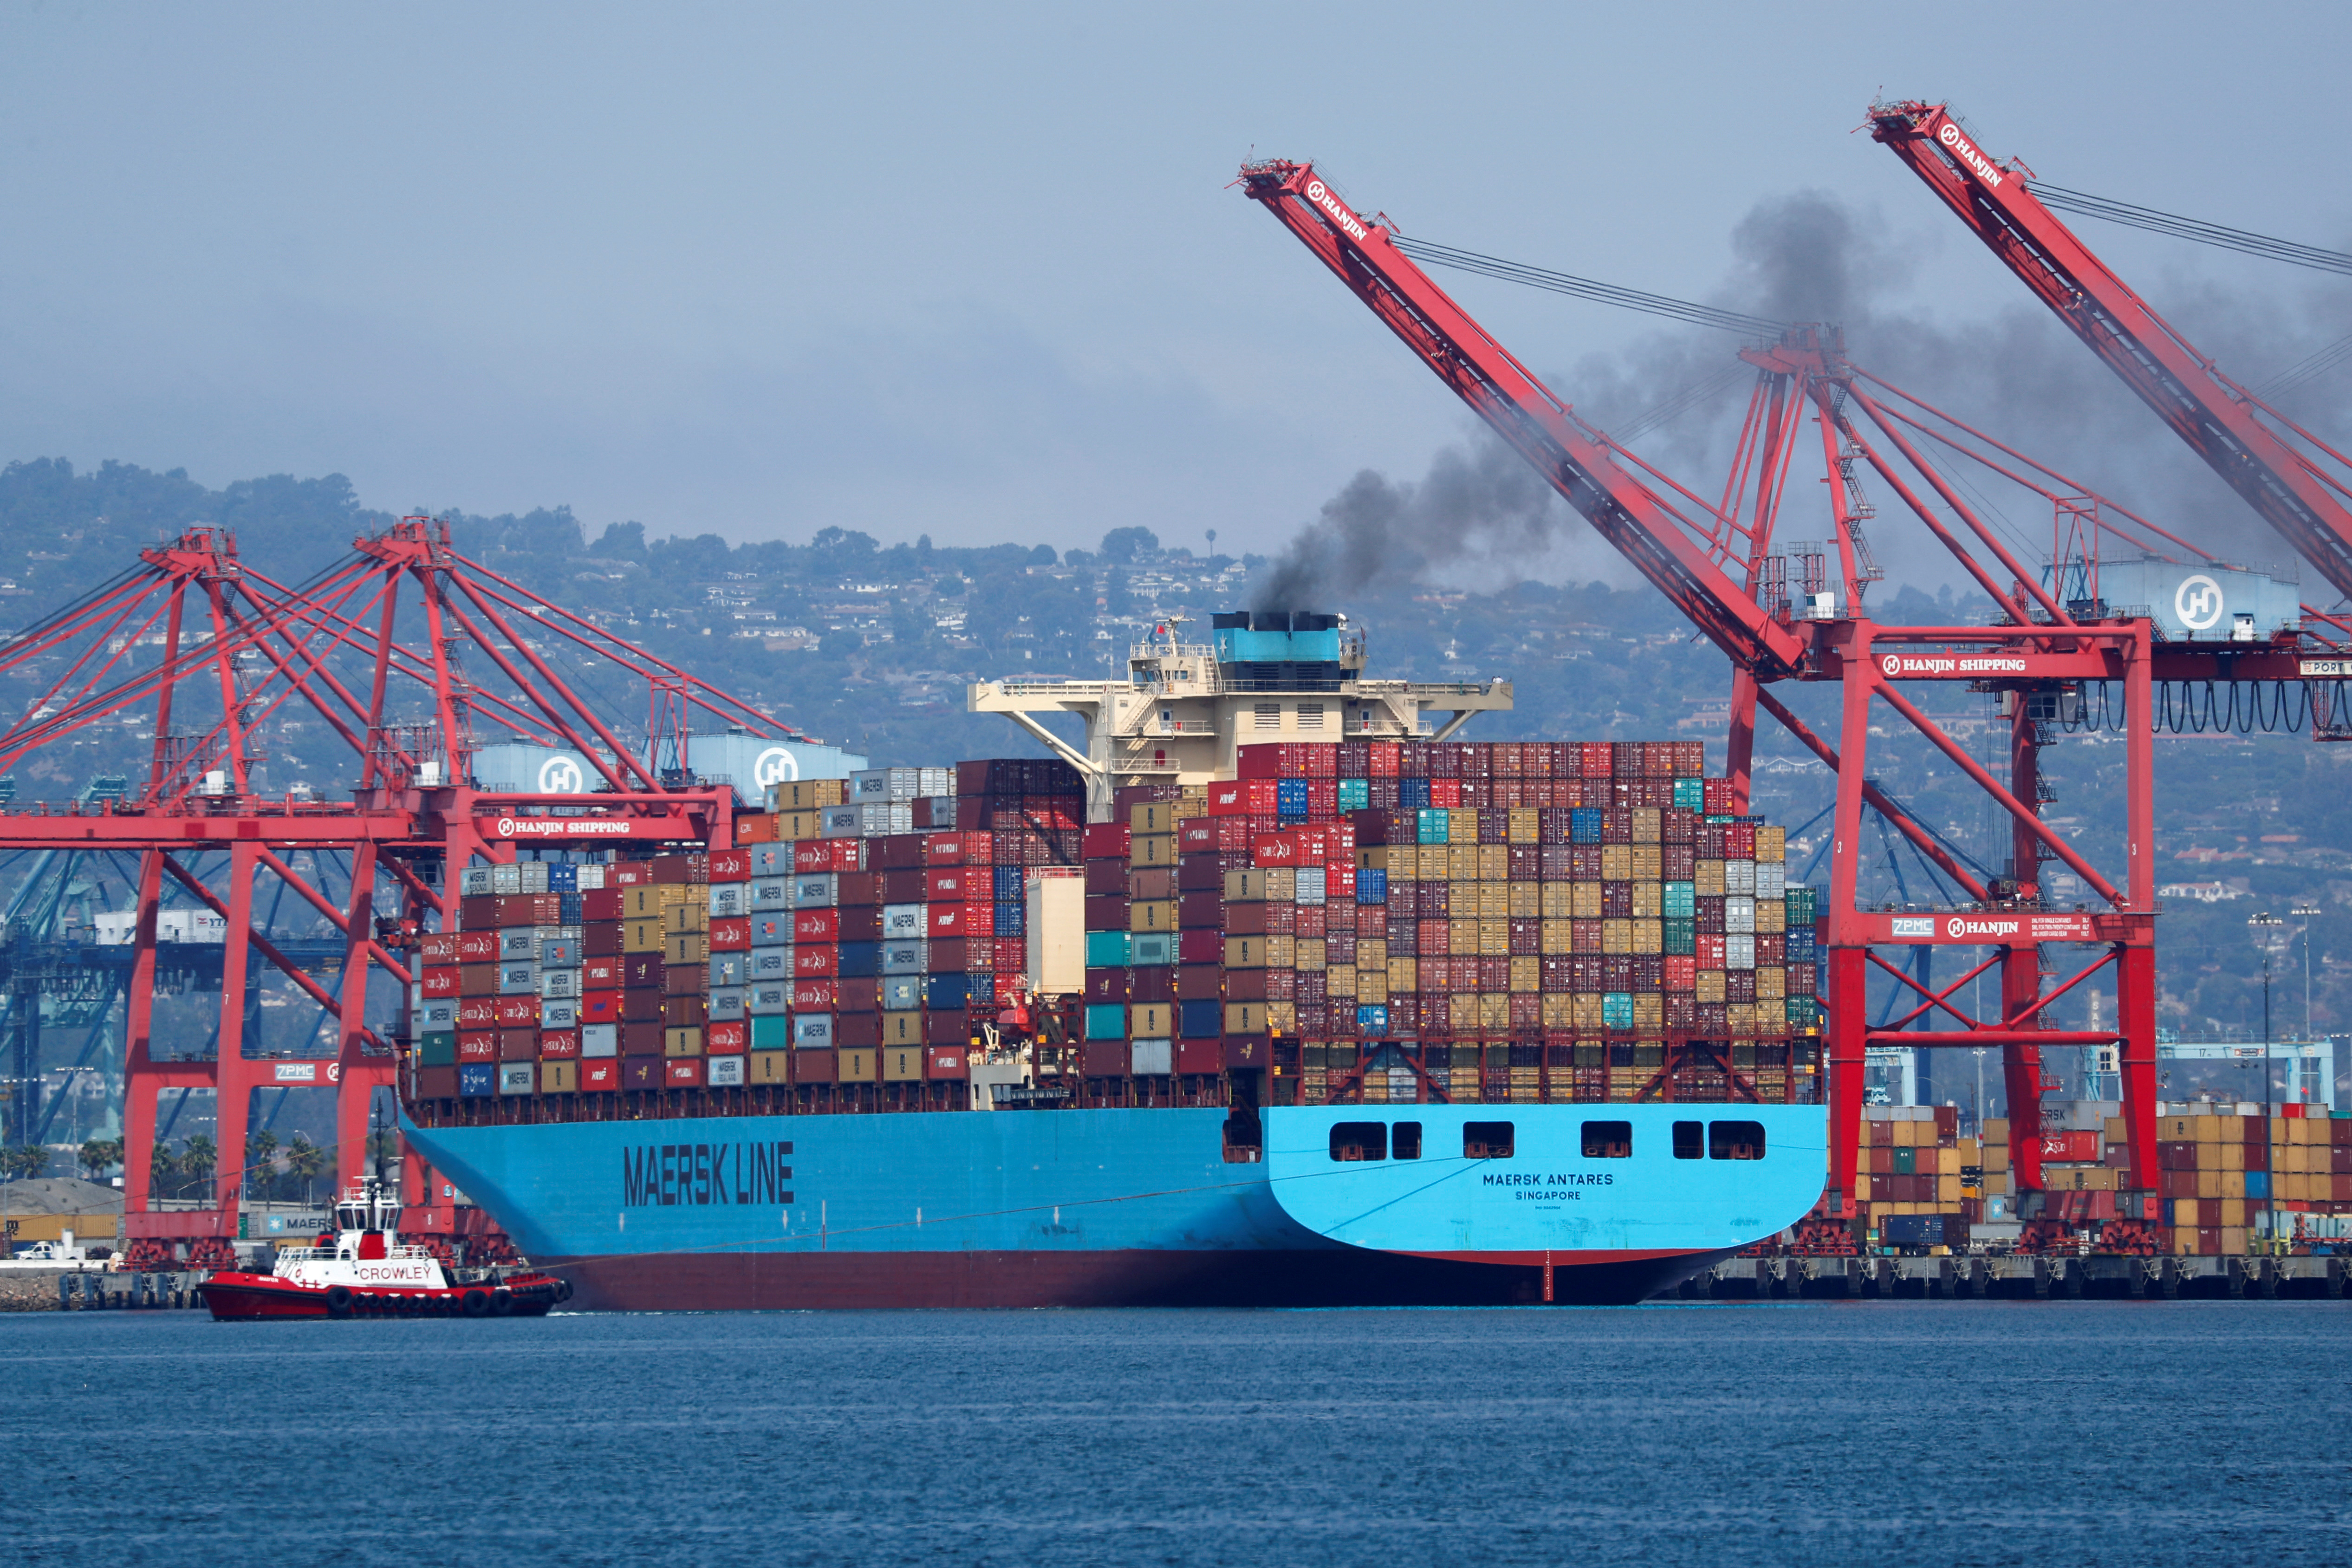 A Maersk Line container ship prepares to depart port in Long Beach, California